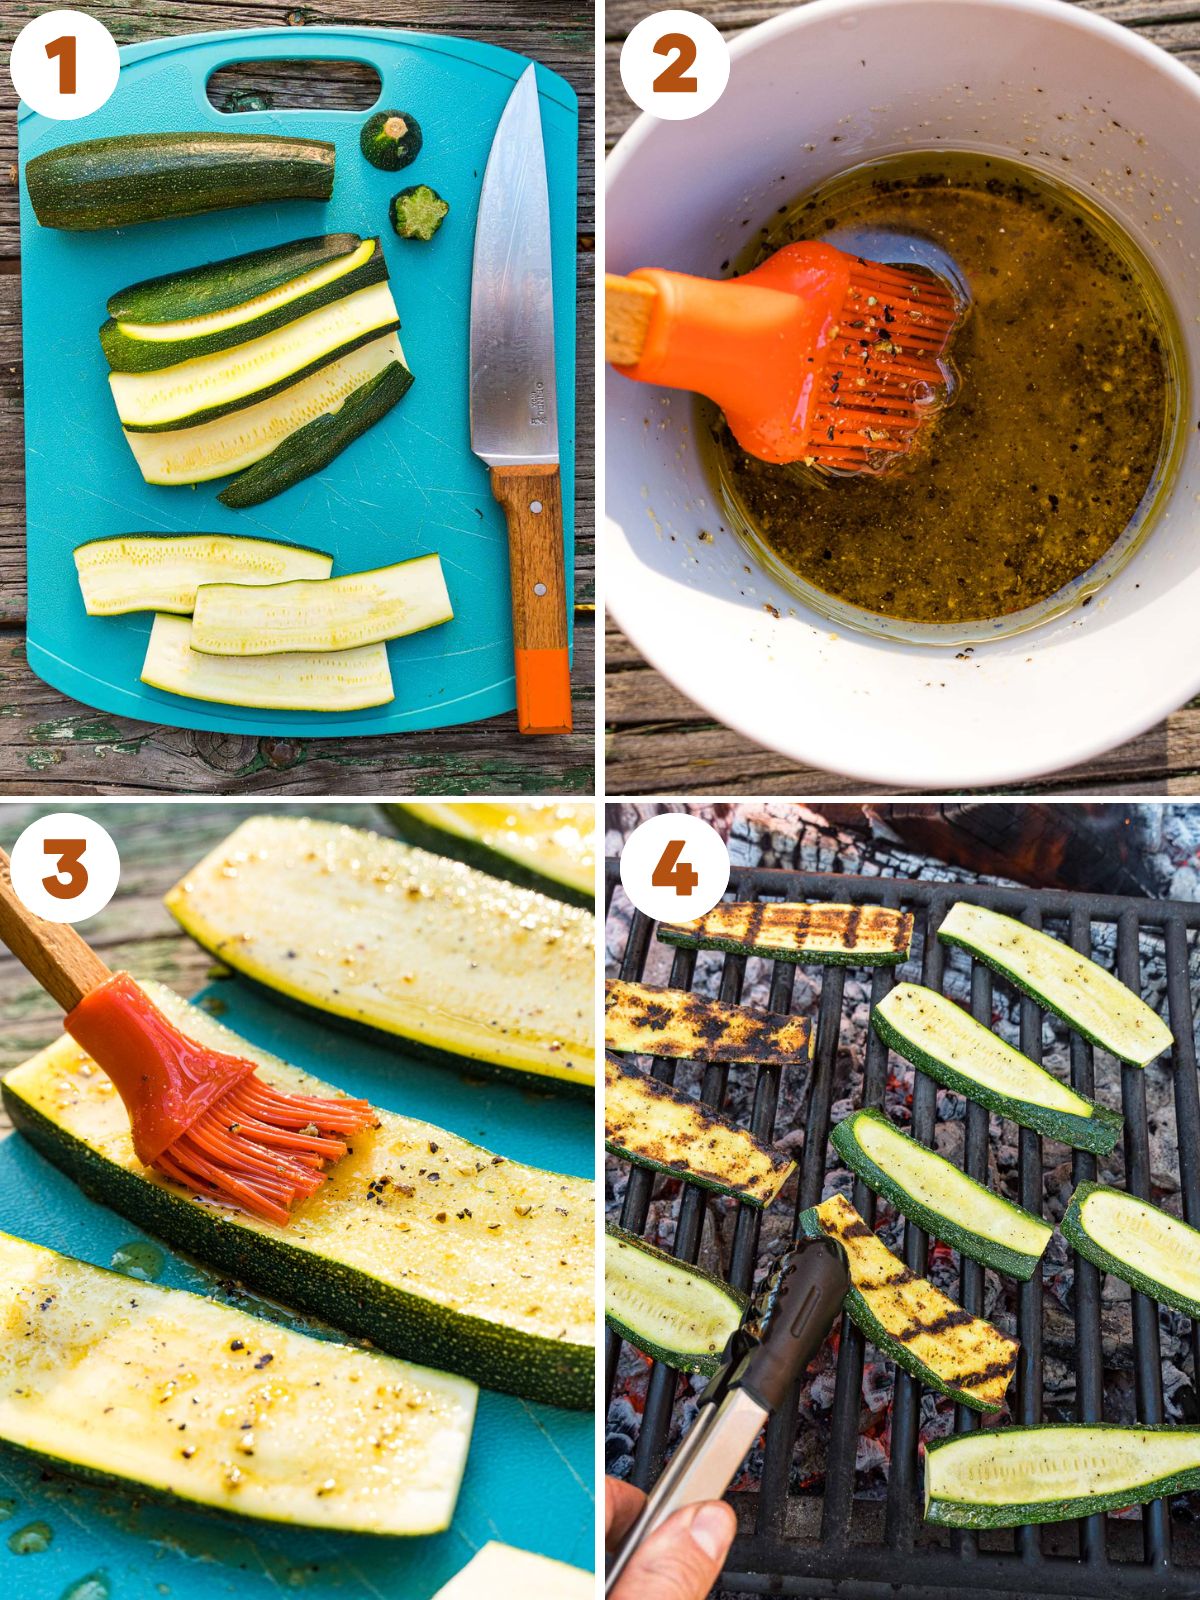 Steps to grill zucchini